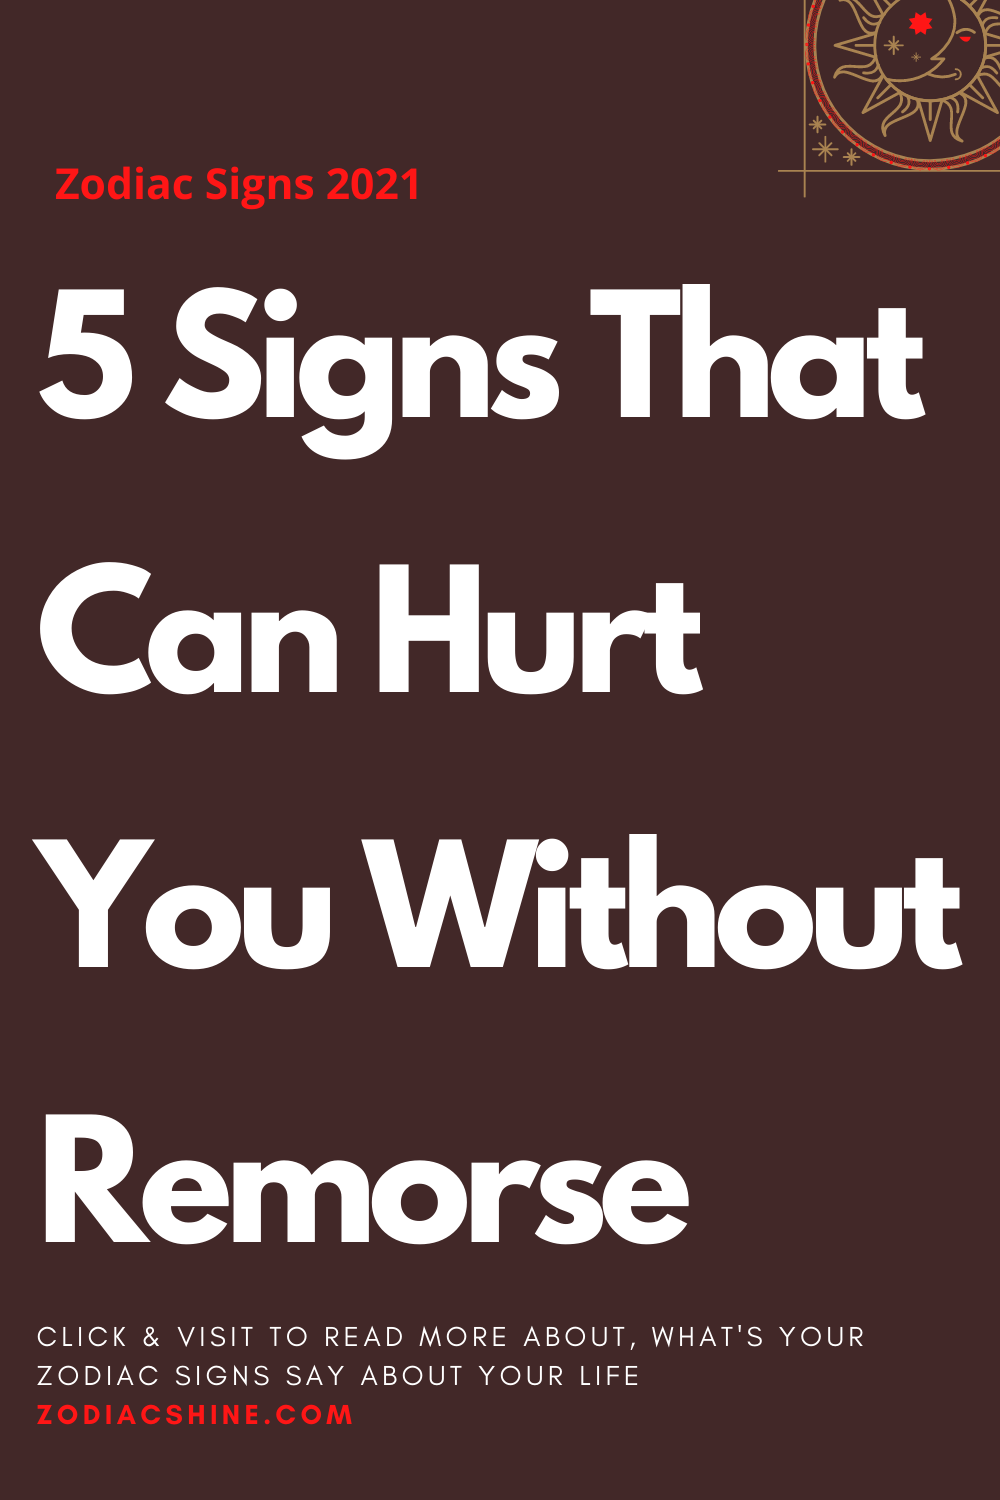 5 Signs That Can Hurt You Without Remorse